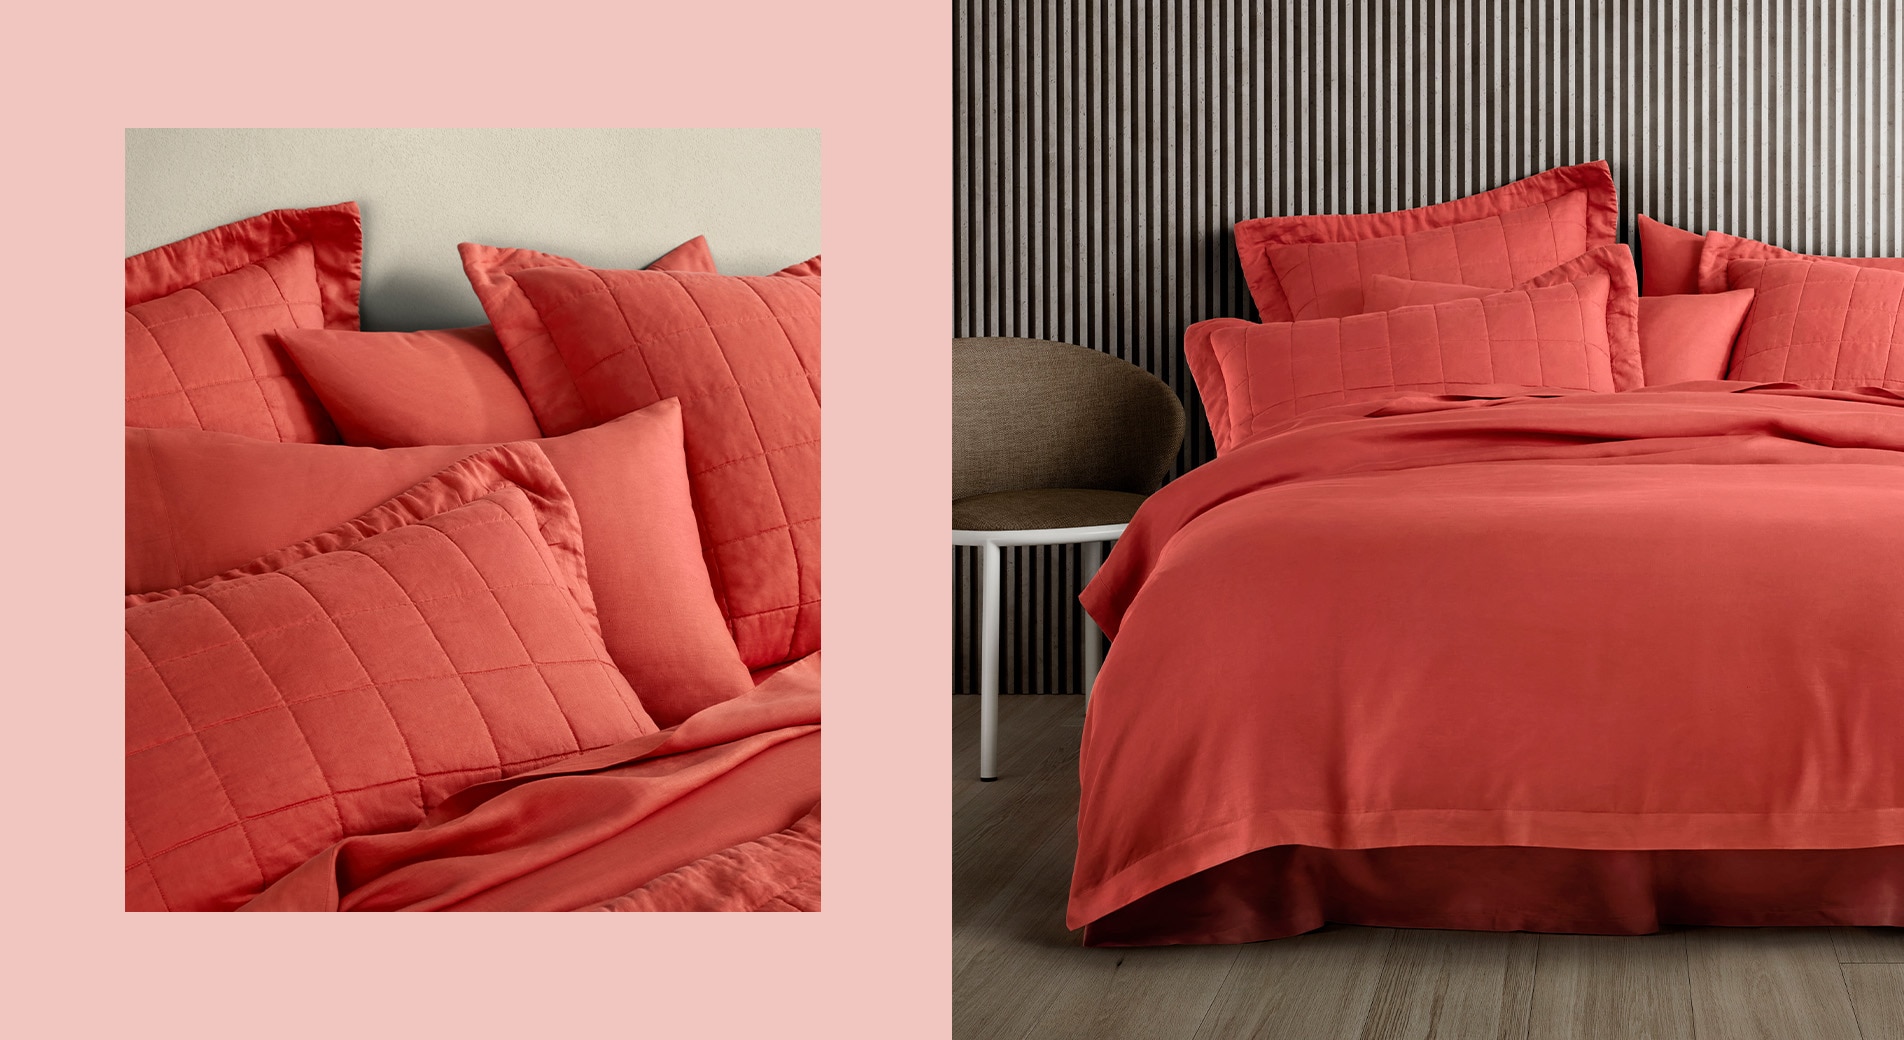 split image. left side: close up of abbotson linen top of bed, washed red shams, pillows and sheets, surrounded by pink border. right side: styled image of washed red abbotson linen bed.